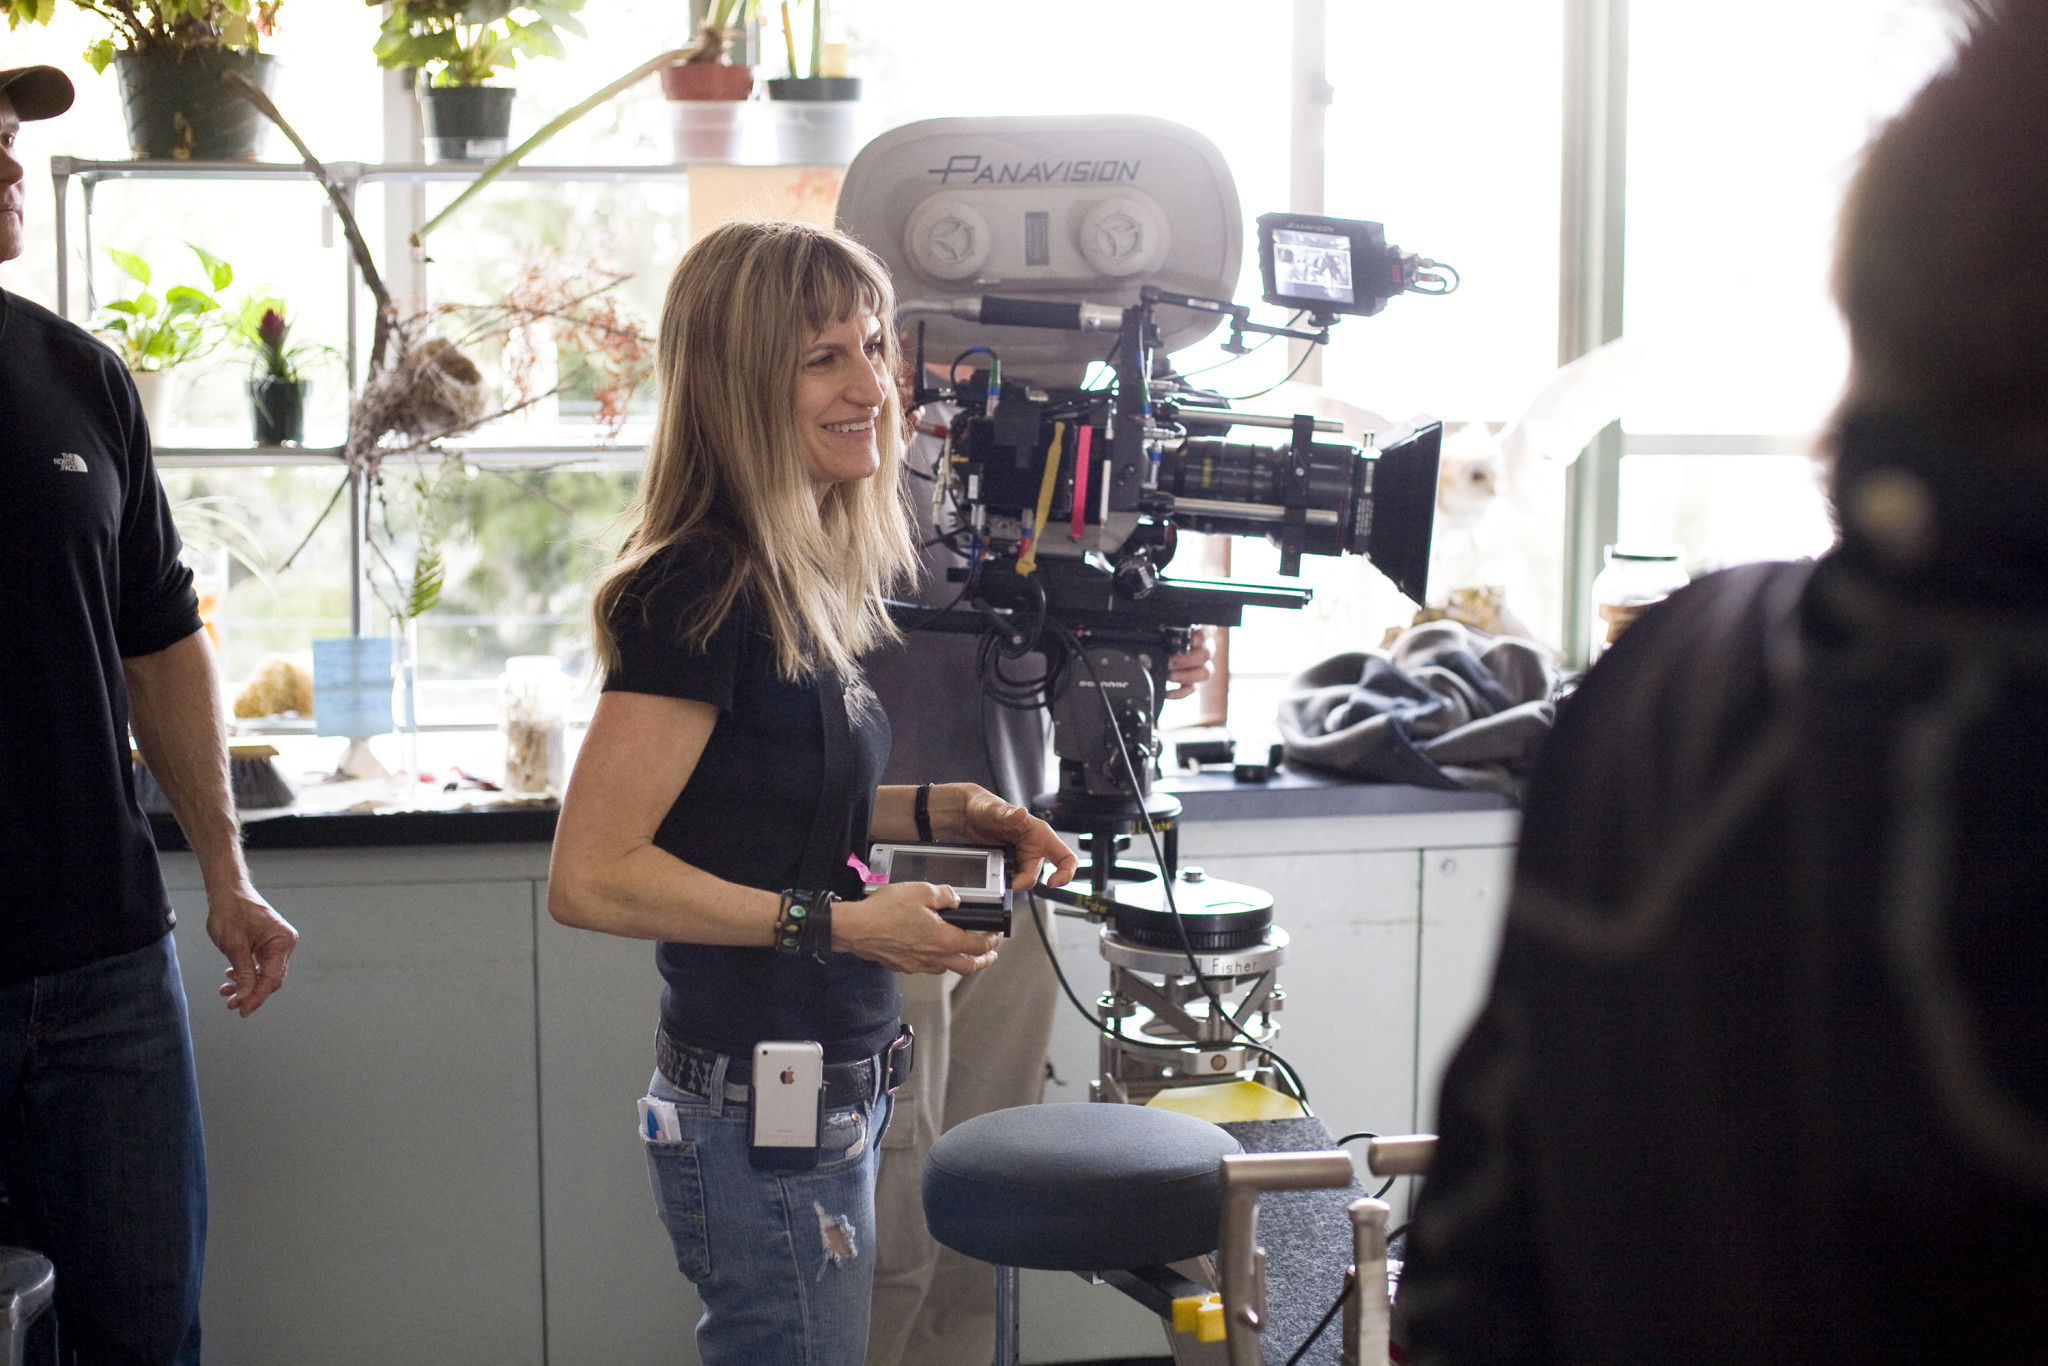 Director CATHERINE HARDWICKE on the set of the motion picture TWILIGHT. Photo by Deana Newcomb, Summit Entertainment (Via MerlinFTP Drop)